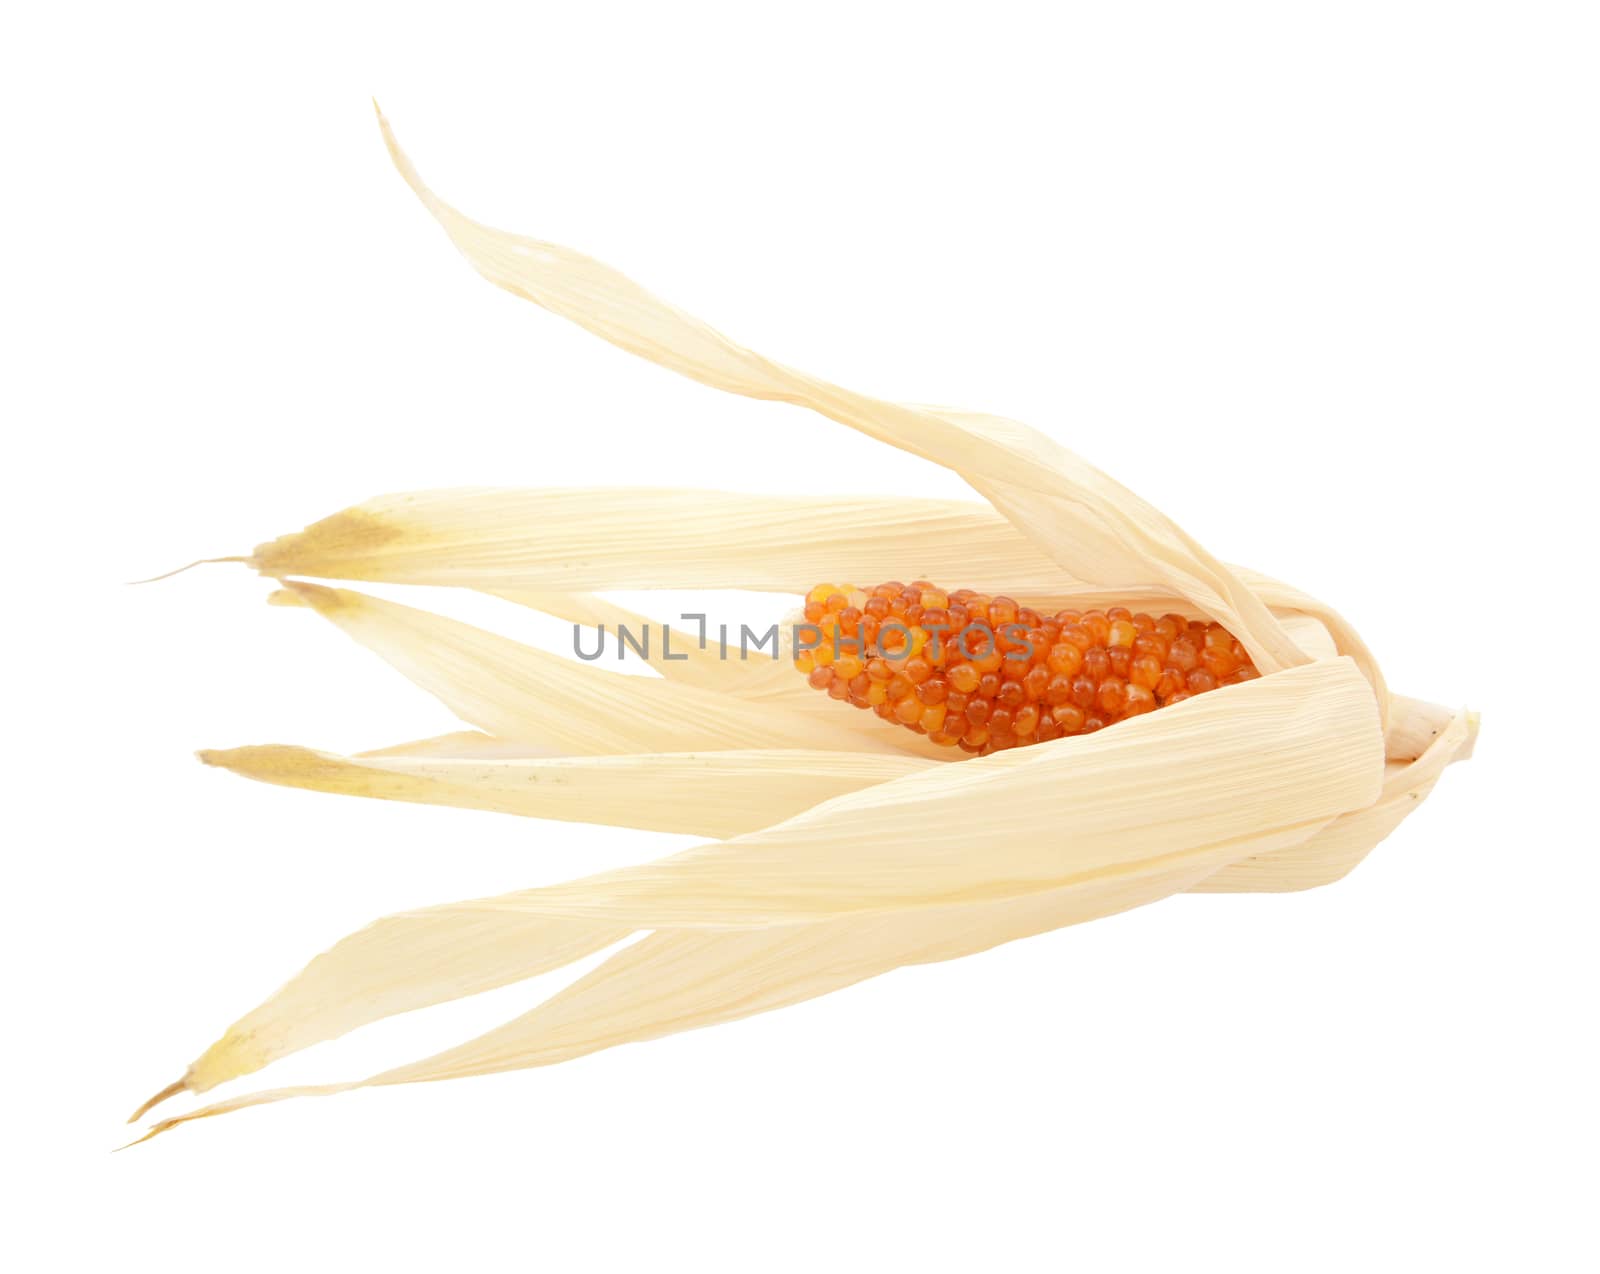 Dried Indian corn with red niblets by sarahdoow